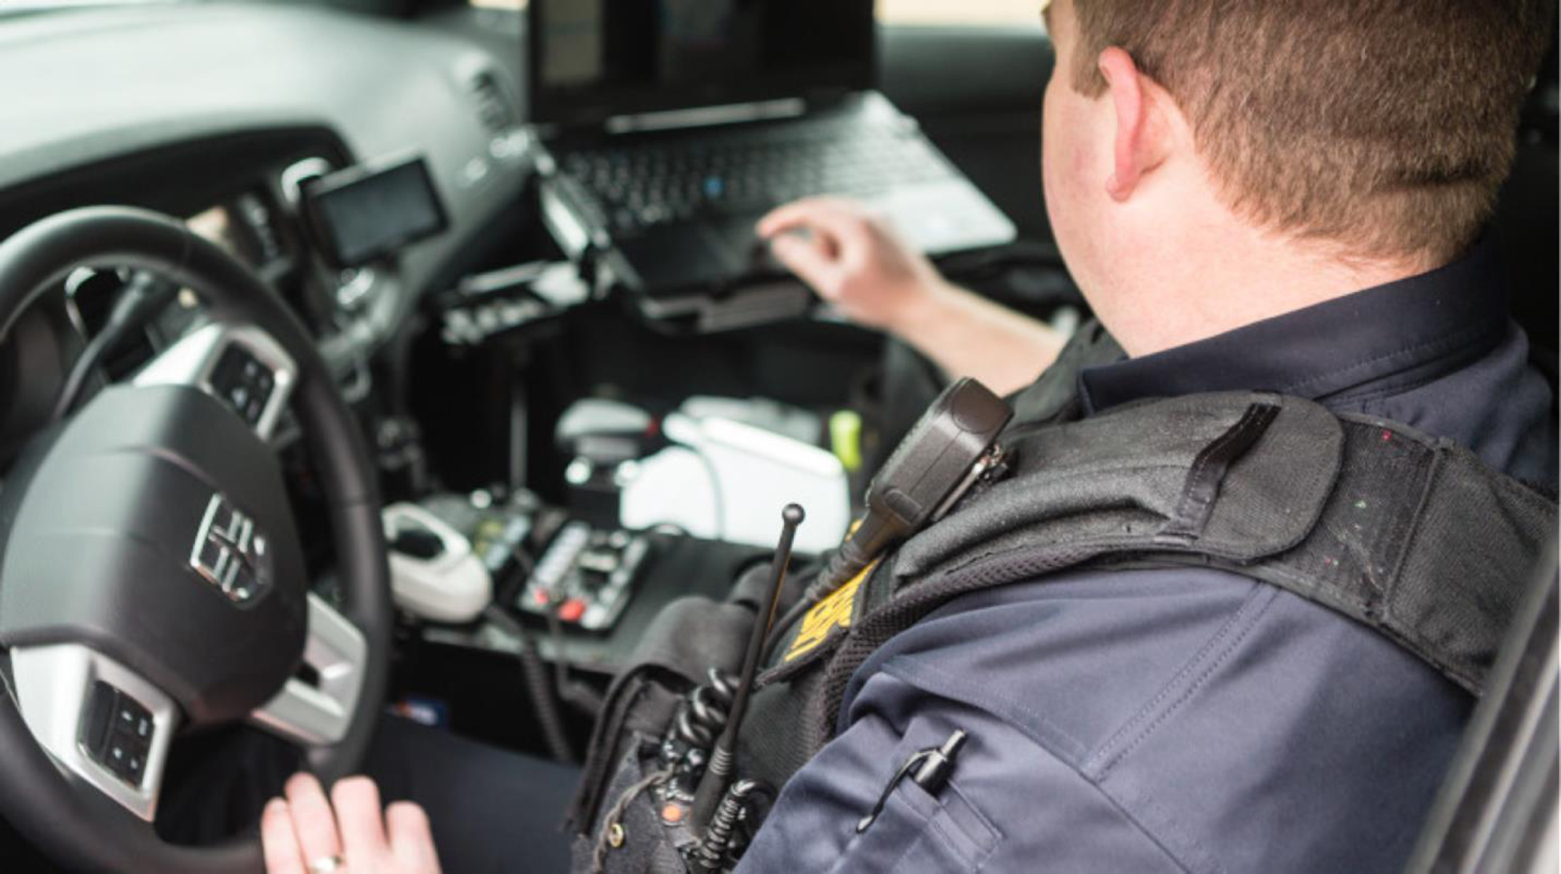 Image of a male police officer sitting in the driver's seat of his vehicle with the door open, looking at a mobile data terminal (police car laptop)